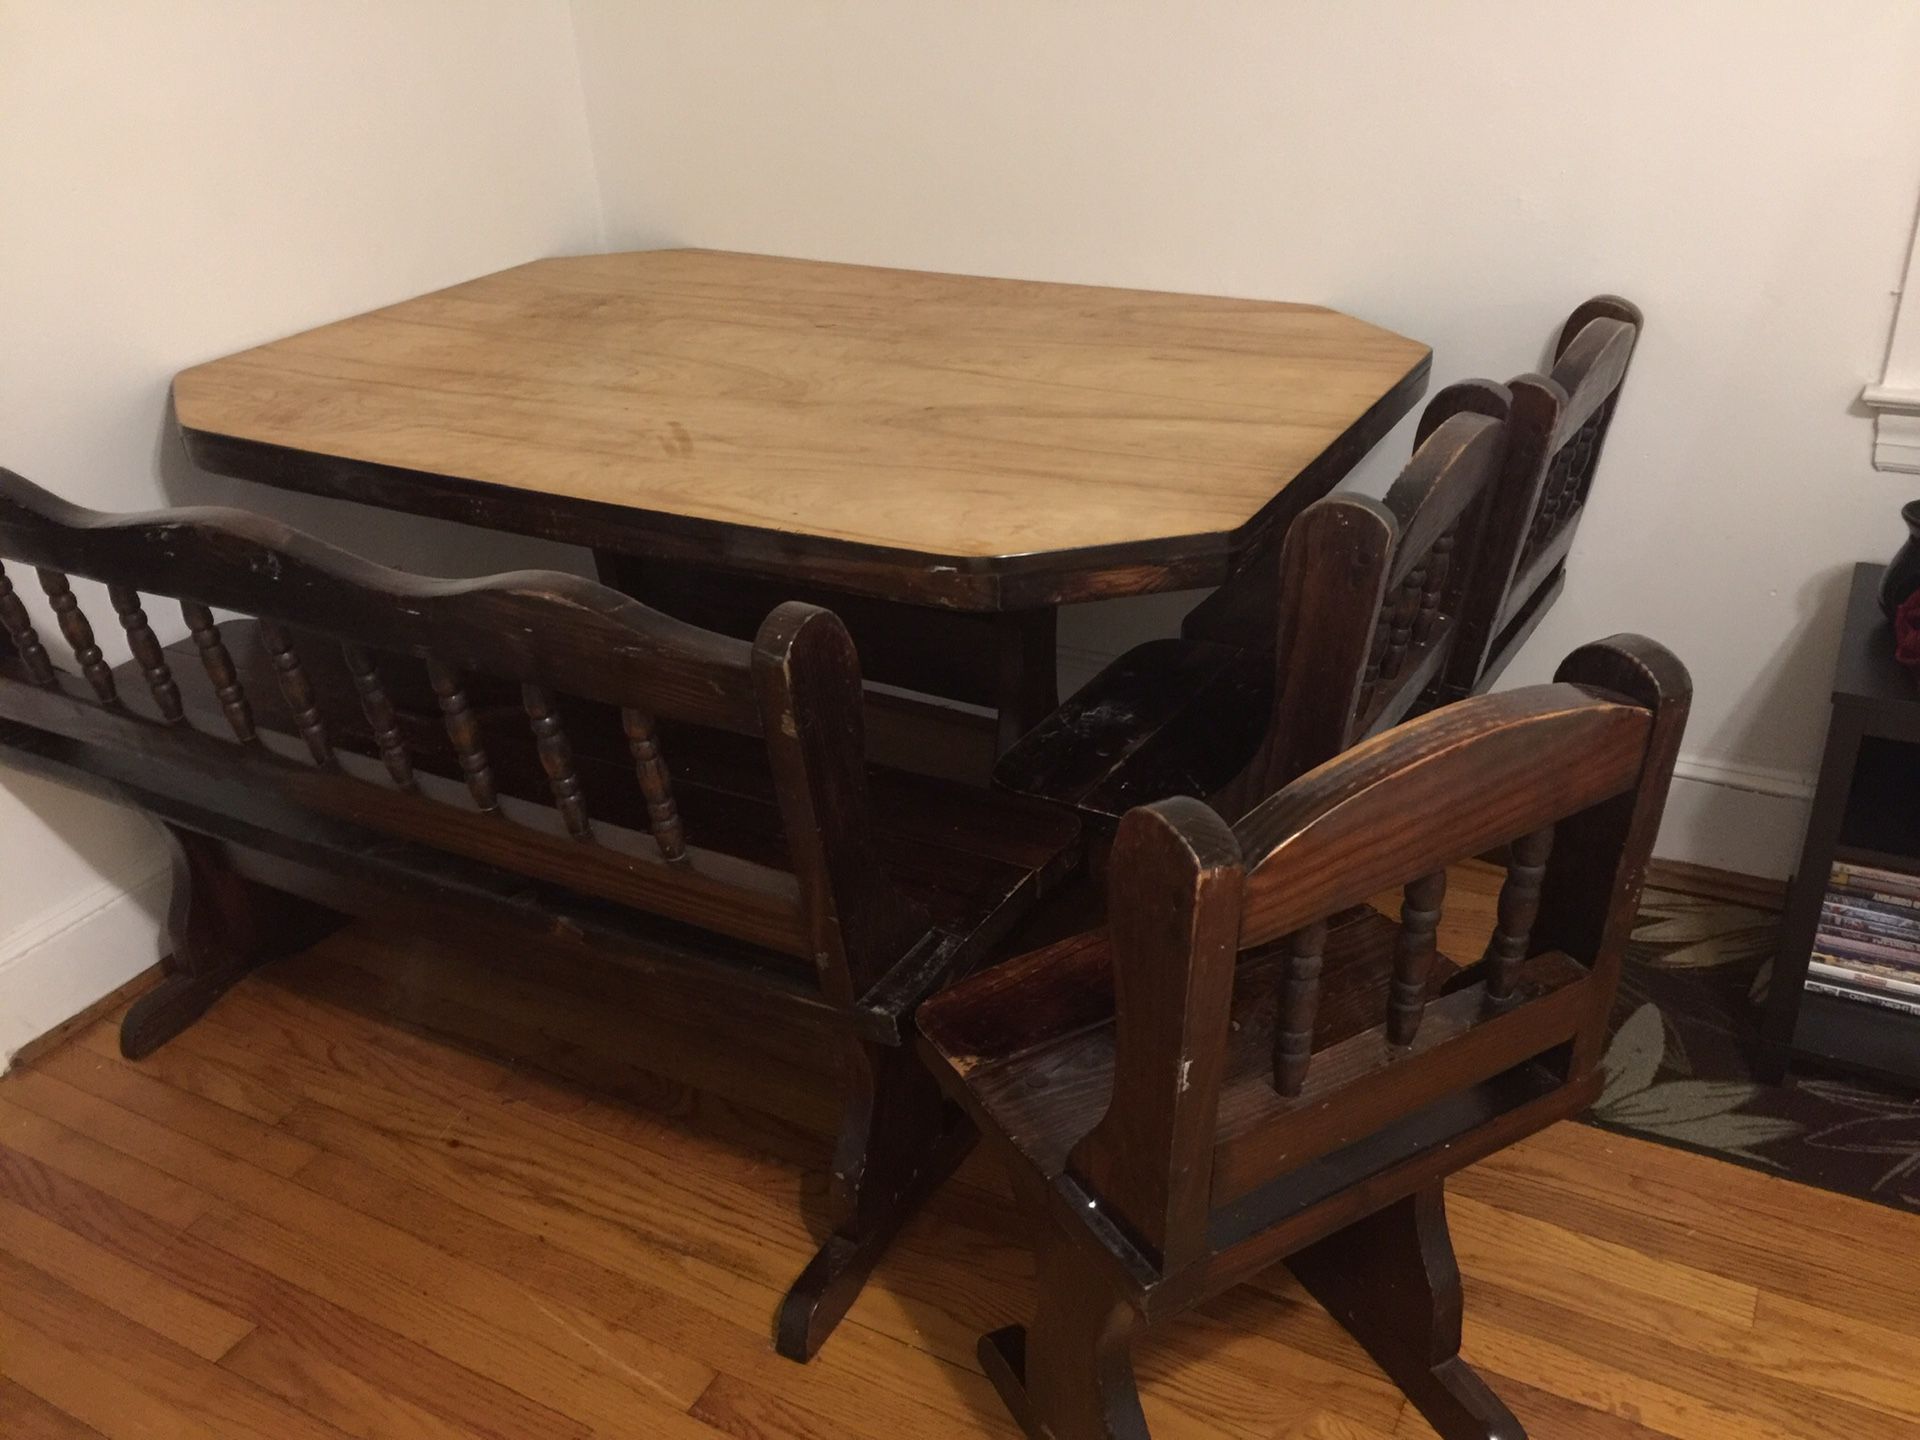 Dining table set & chairs / bench